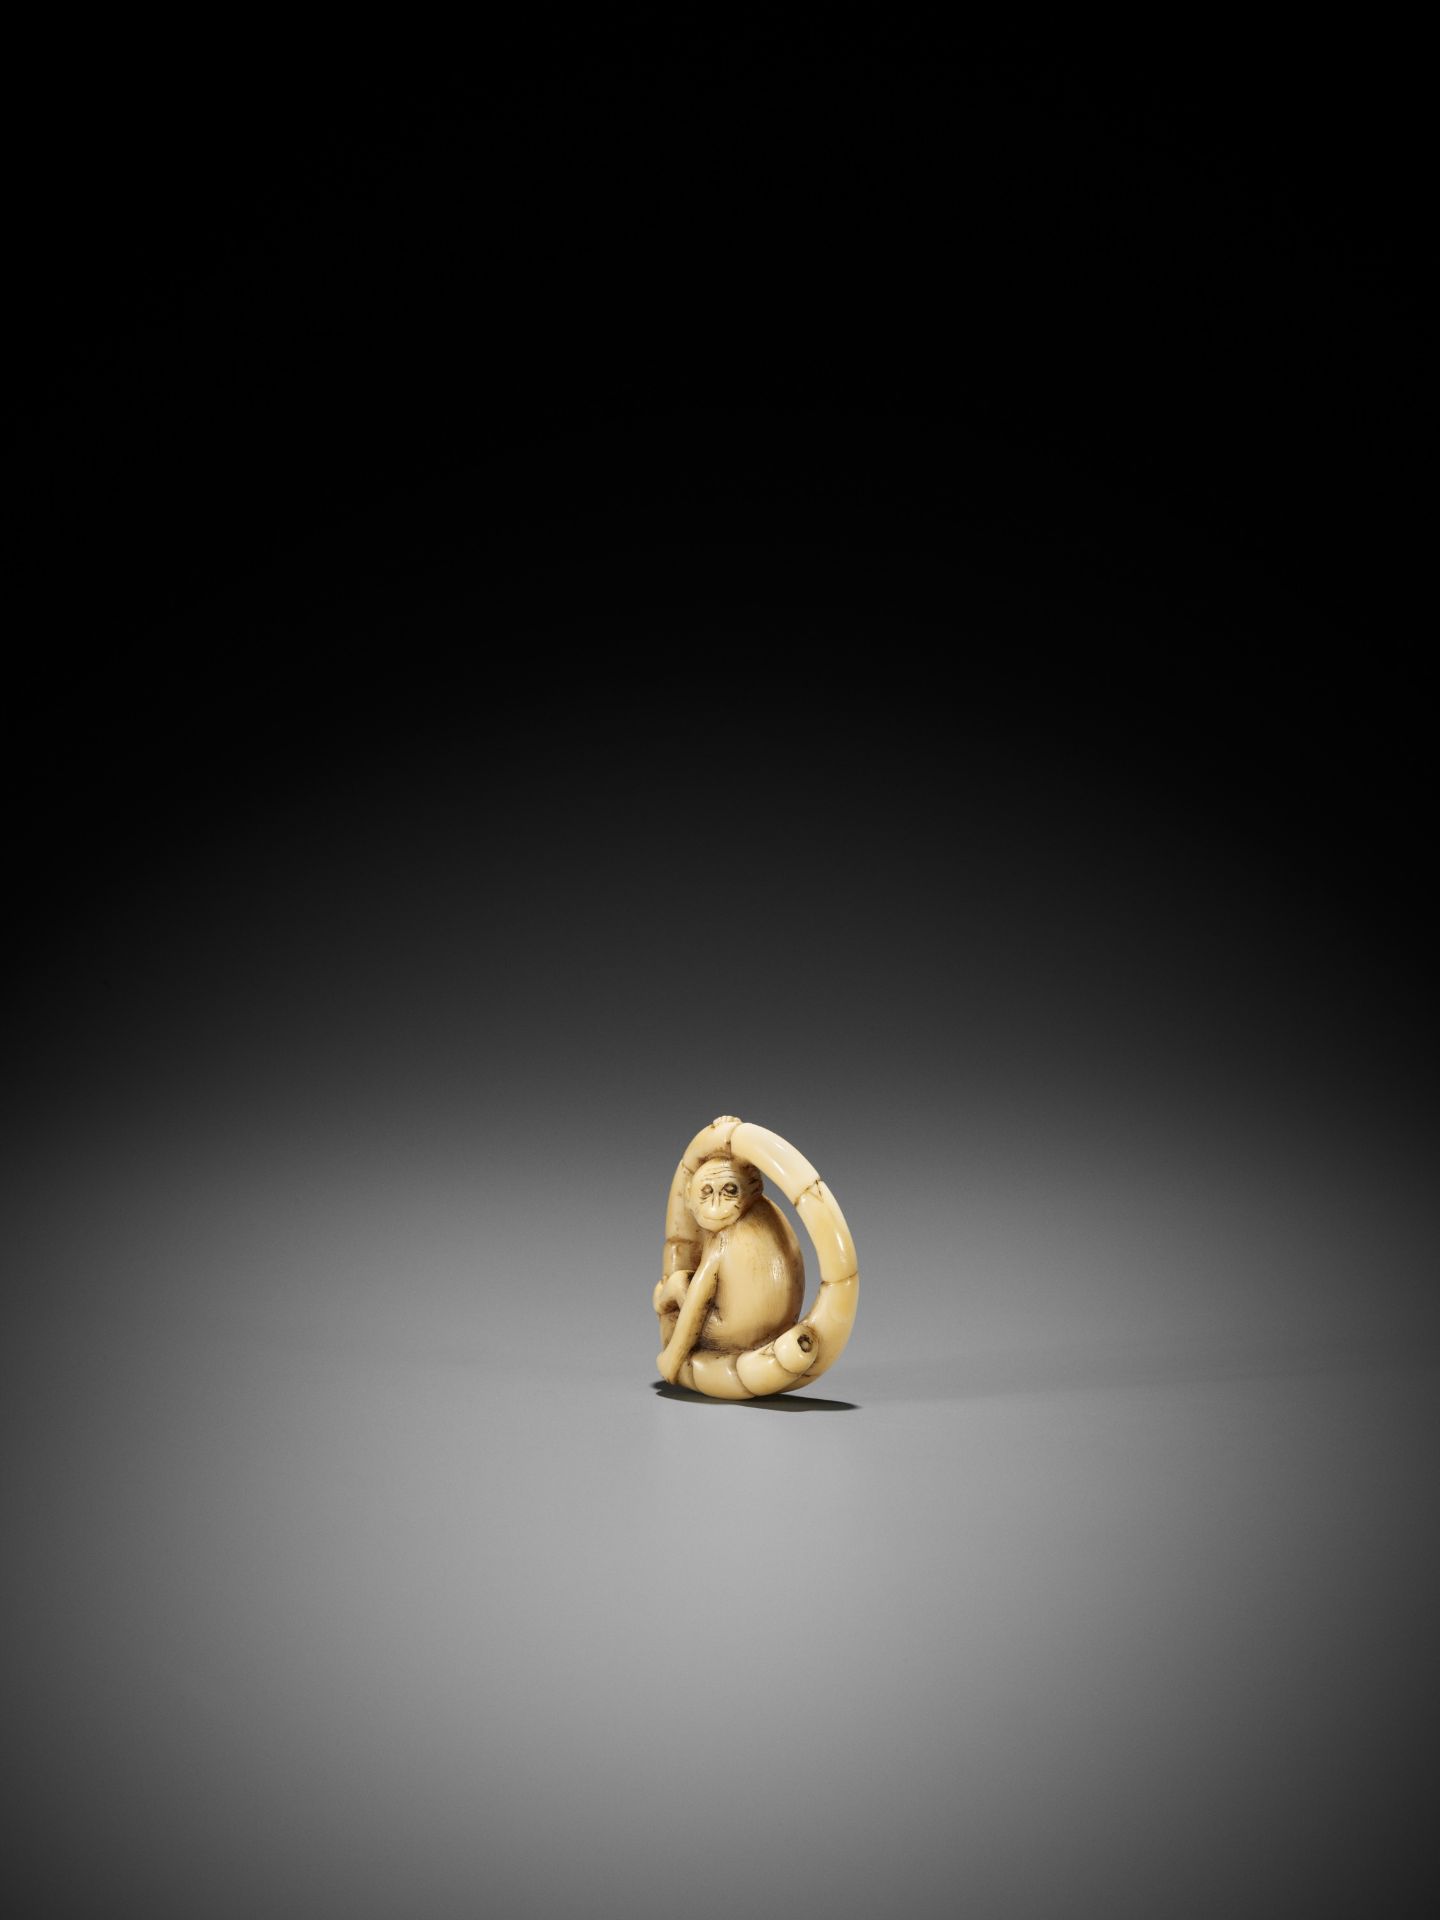 A MARINE IVORY NETSUKE OF A MONKEY SITTING IN A COILED BAMBOO NODE - Image 3 of 9